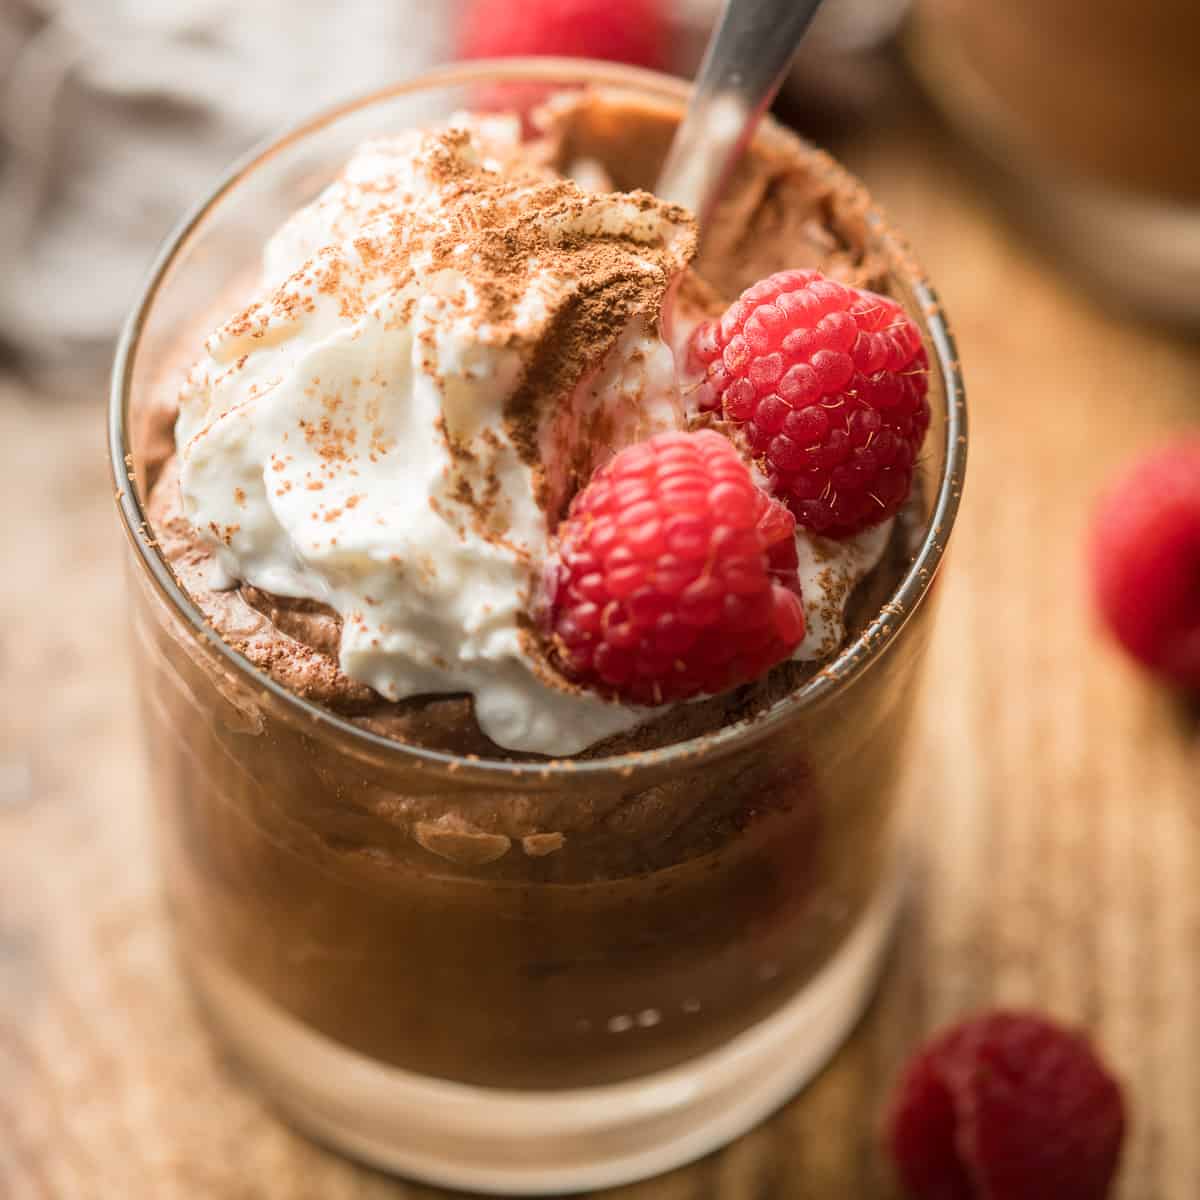 Cup of Vegan Chocolate Mousse with raspberries, whipped cream and cocoa powder on top.